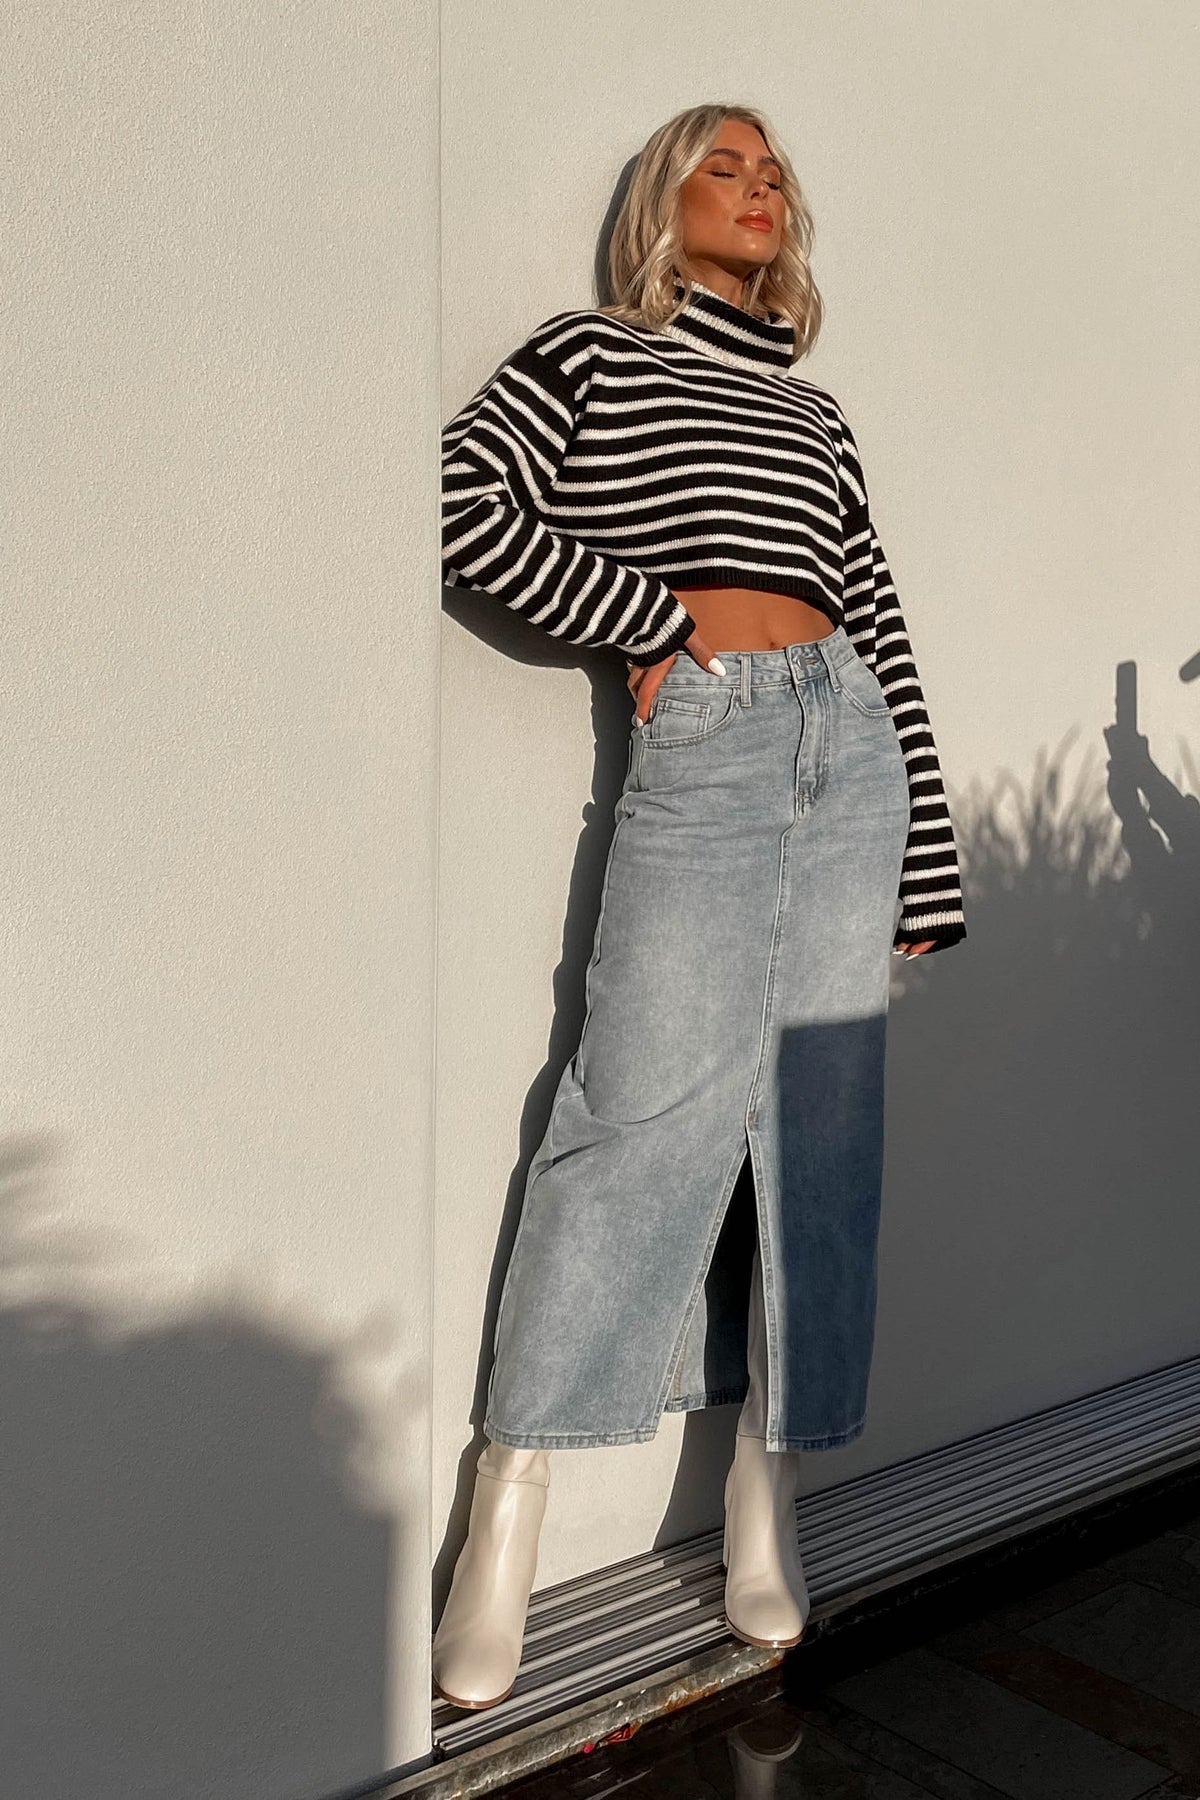 Tilly Top, BASIC TOPS, BLACK, CASUAL TOPS, COTTON, CROP TOP, CROP TOPS, KNIT, KNITS, KNITTED, KNITWEAR, LONG SLEEVE, new arrivals, TOP, TOPS, , -MISHKAH